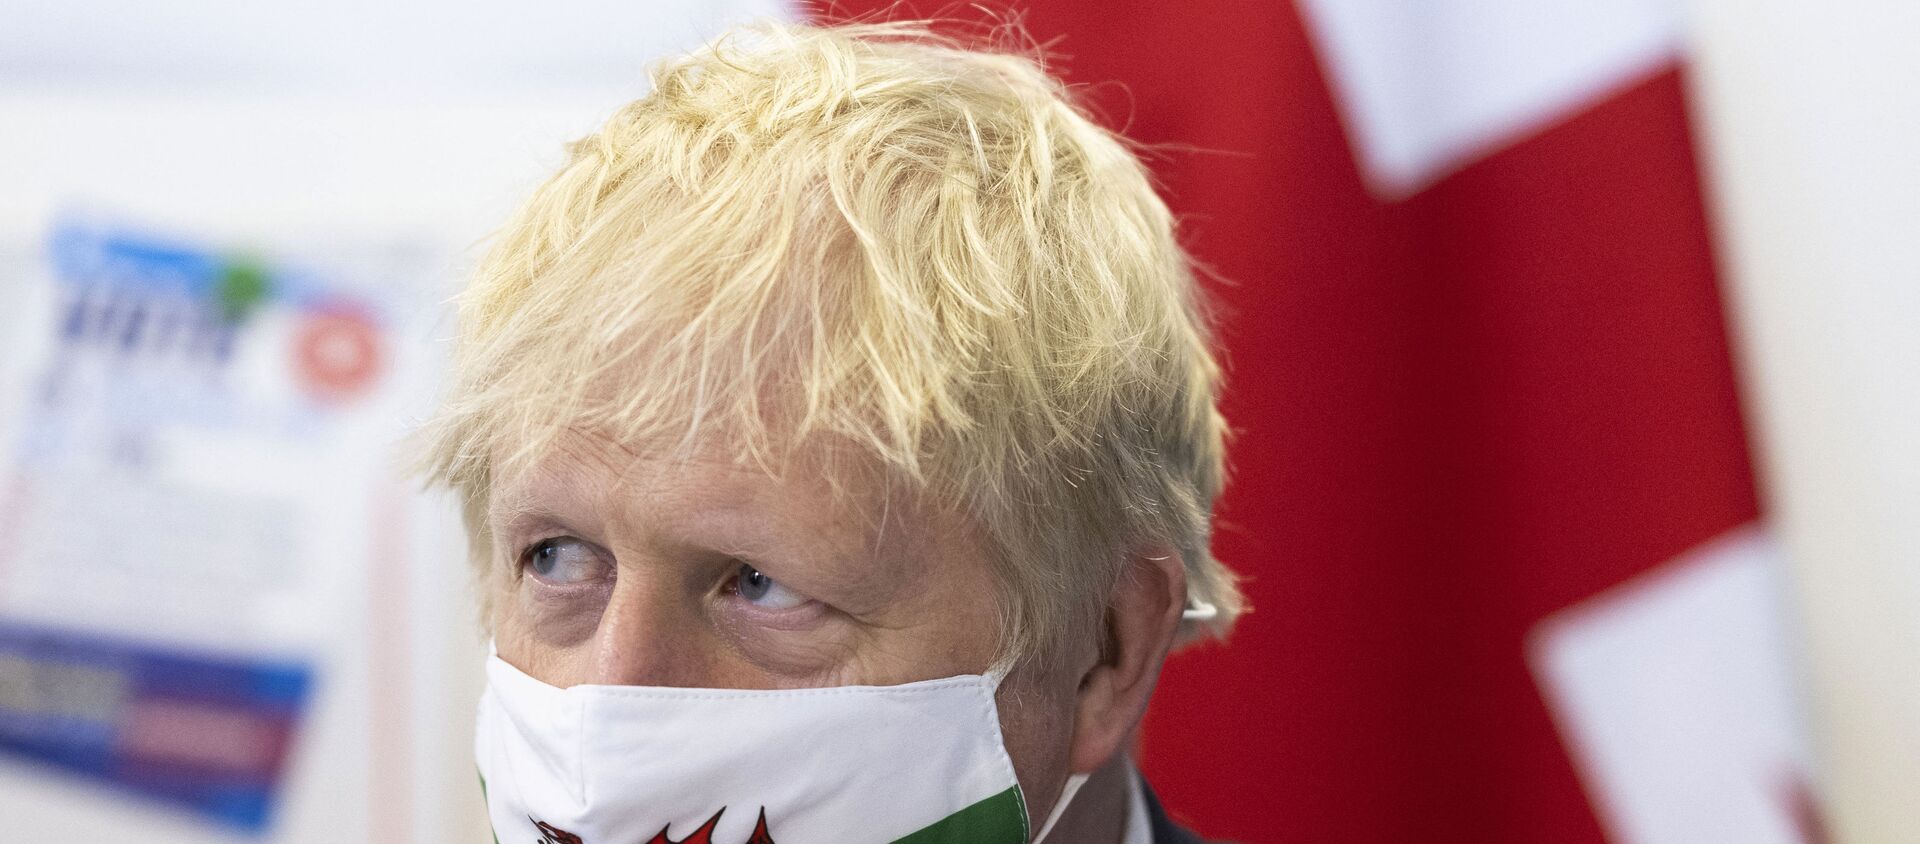 British Prime Minister Boris Johnson wears a Welsh flag face mask as he visits Marco’s cafe in Barry Island during the Senedd election campaign on May 3, 2021 in Barry, south Wales - Sputnik International, 1920, 07.07.2021